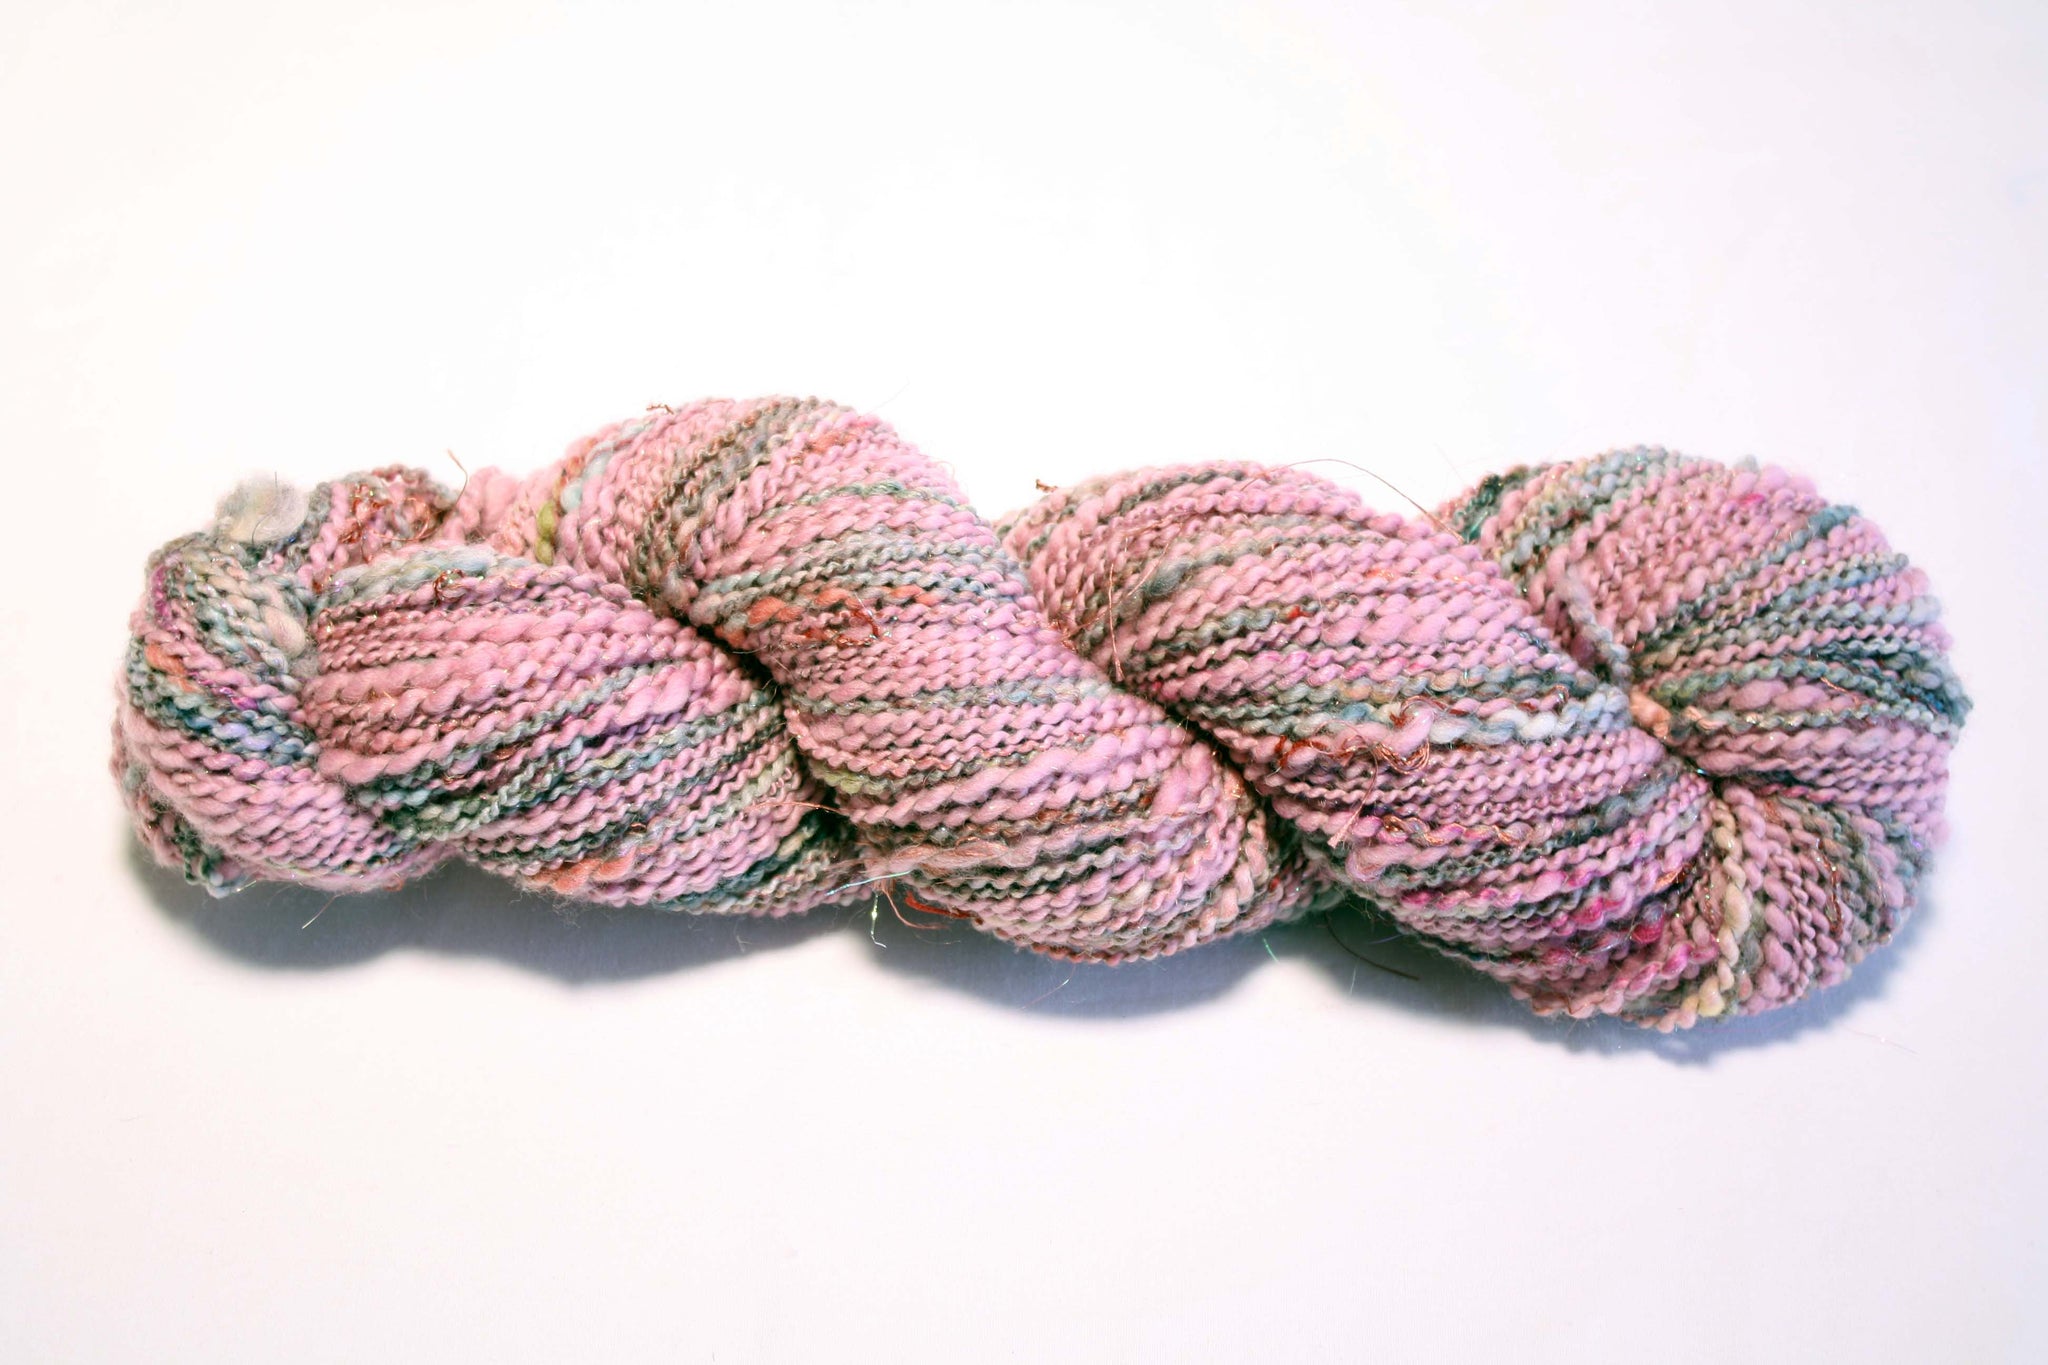 Add It Up: How to Price Your Handspun Yarns for Sale